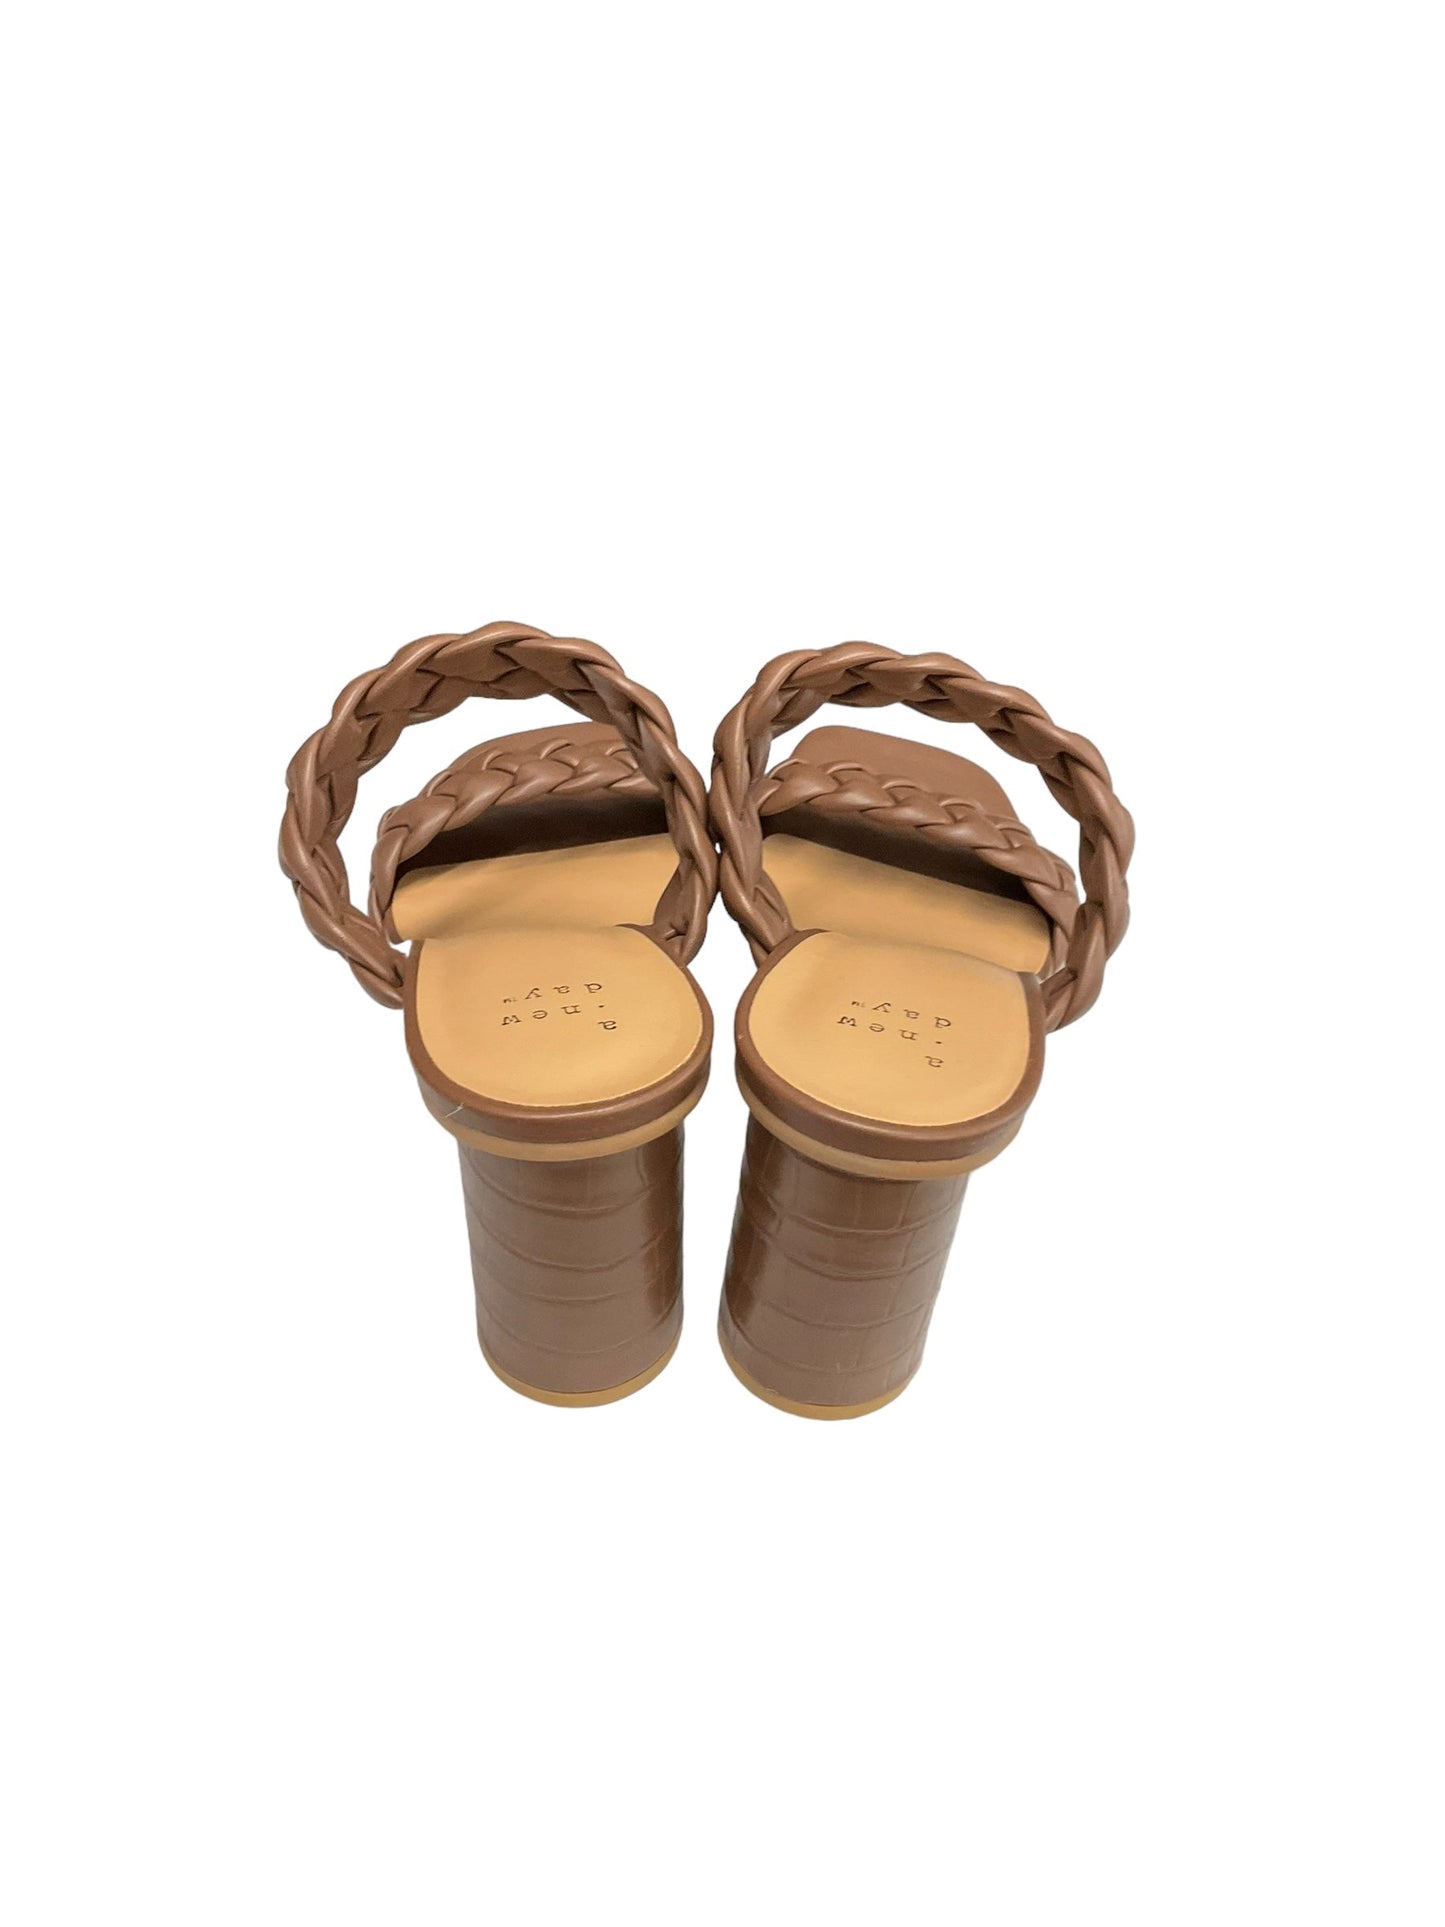 Brown Sandals Heels Block A New Day, Size 9